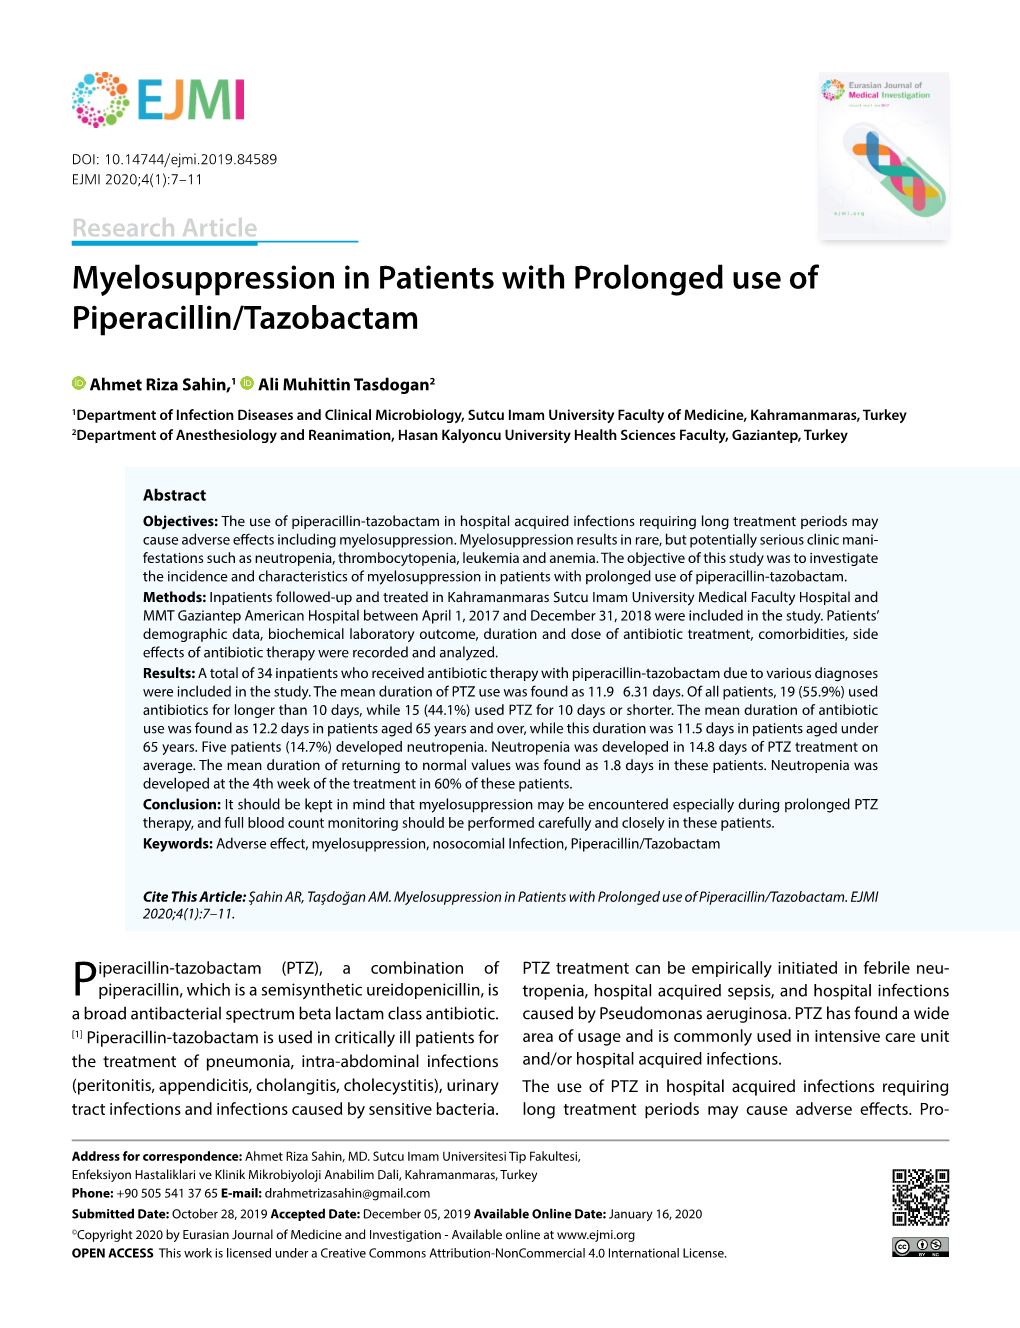 Myelosuppression in Patients with Prolonged Use of Piperacillin/Tazobactam